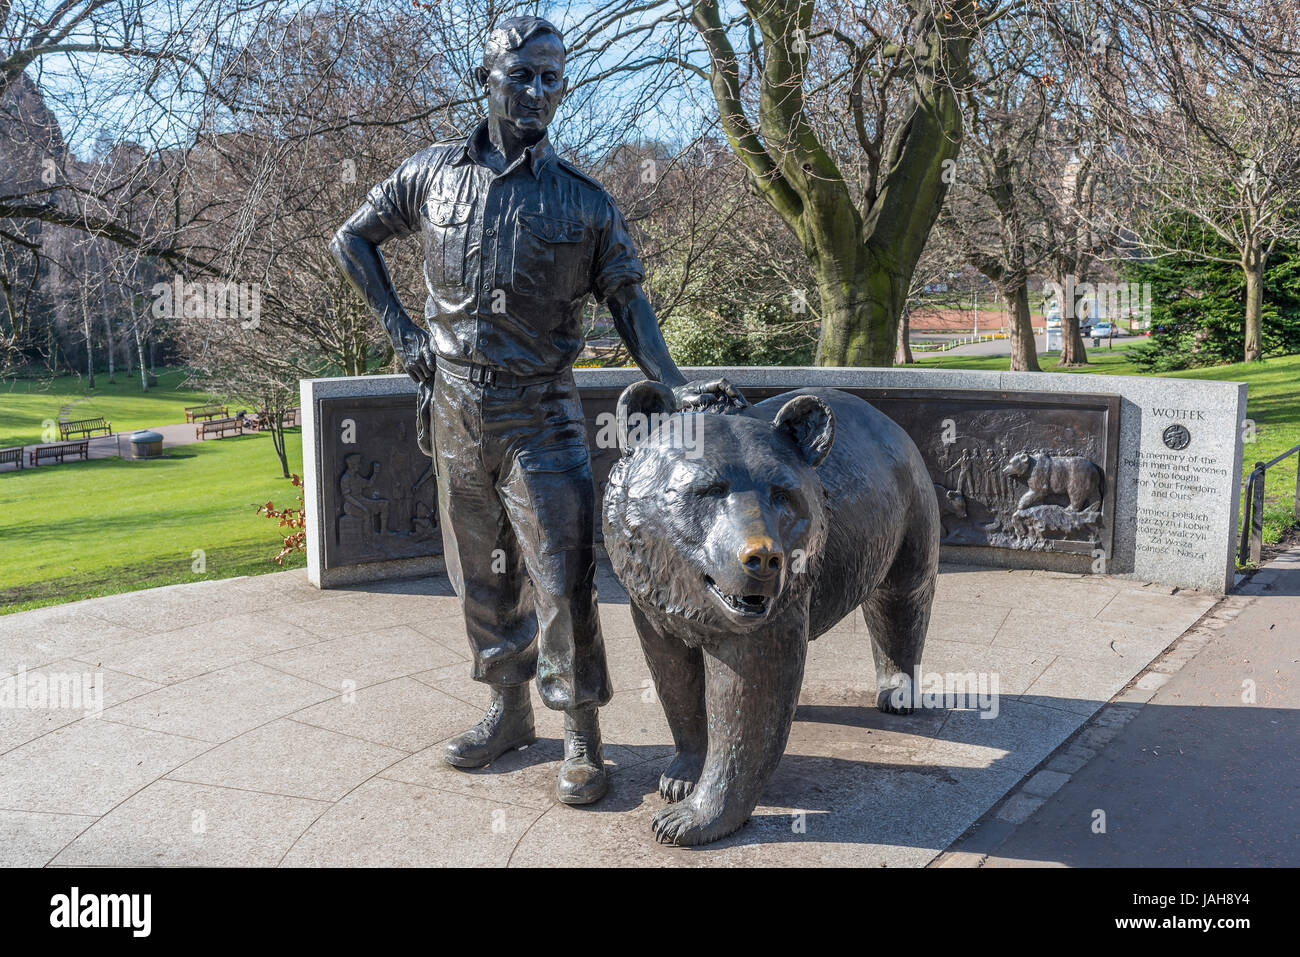 Statue depicting Wojtek the 'Soldier Bear' who was adopted by Polish troops during Second World War, West Princes Street Gardens, Edinburgh, Scotland Stock Photo